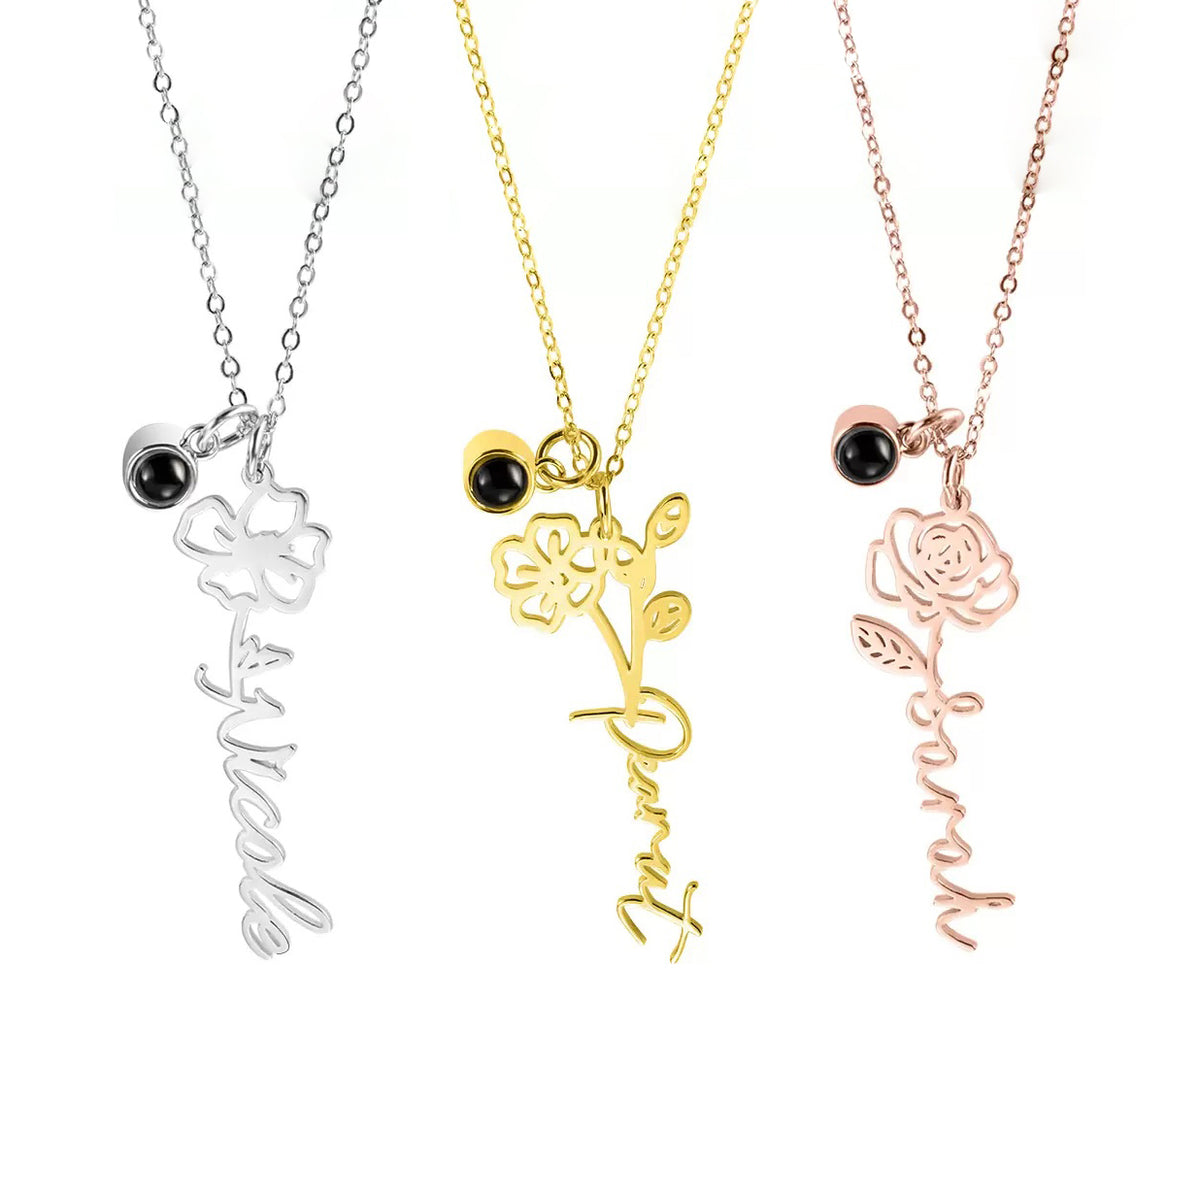 Birth Flower Projection Name Necklace